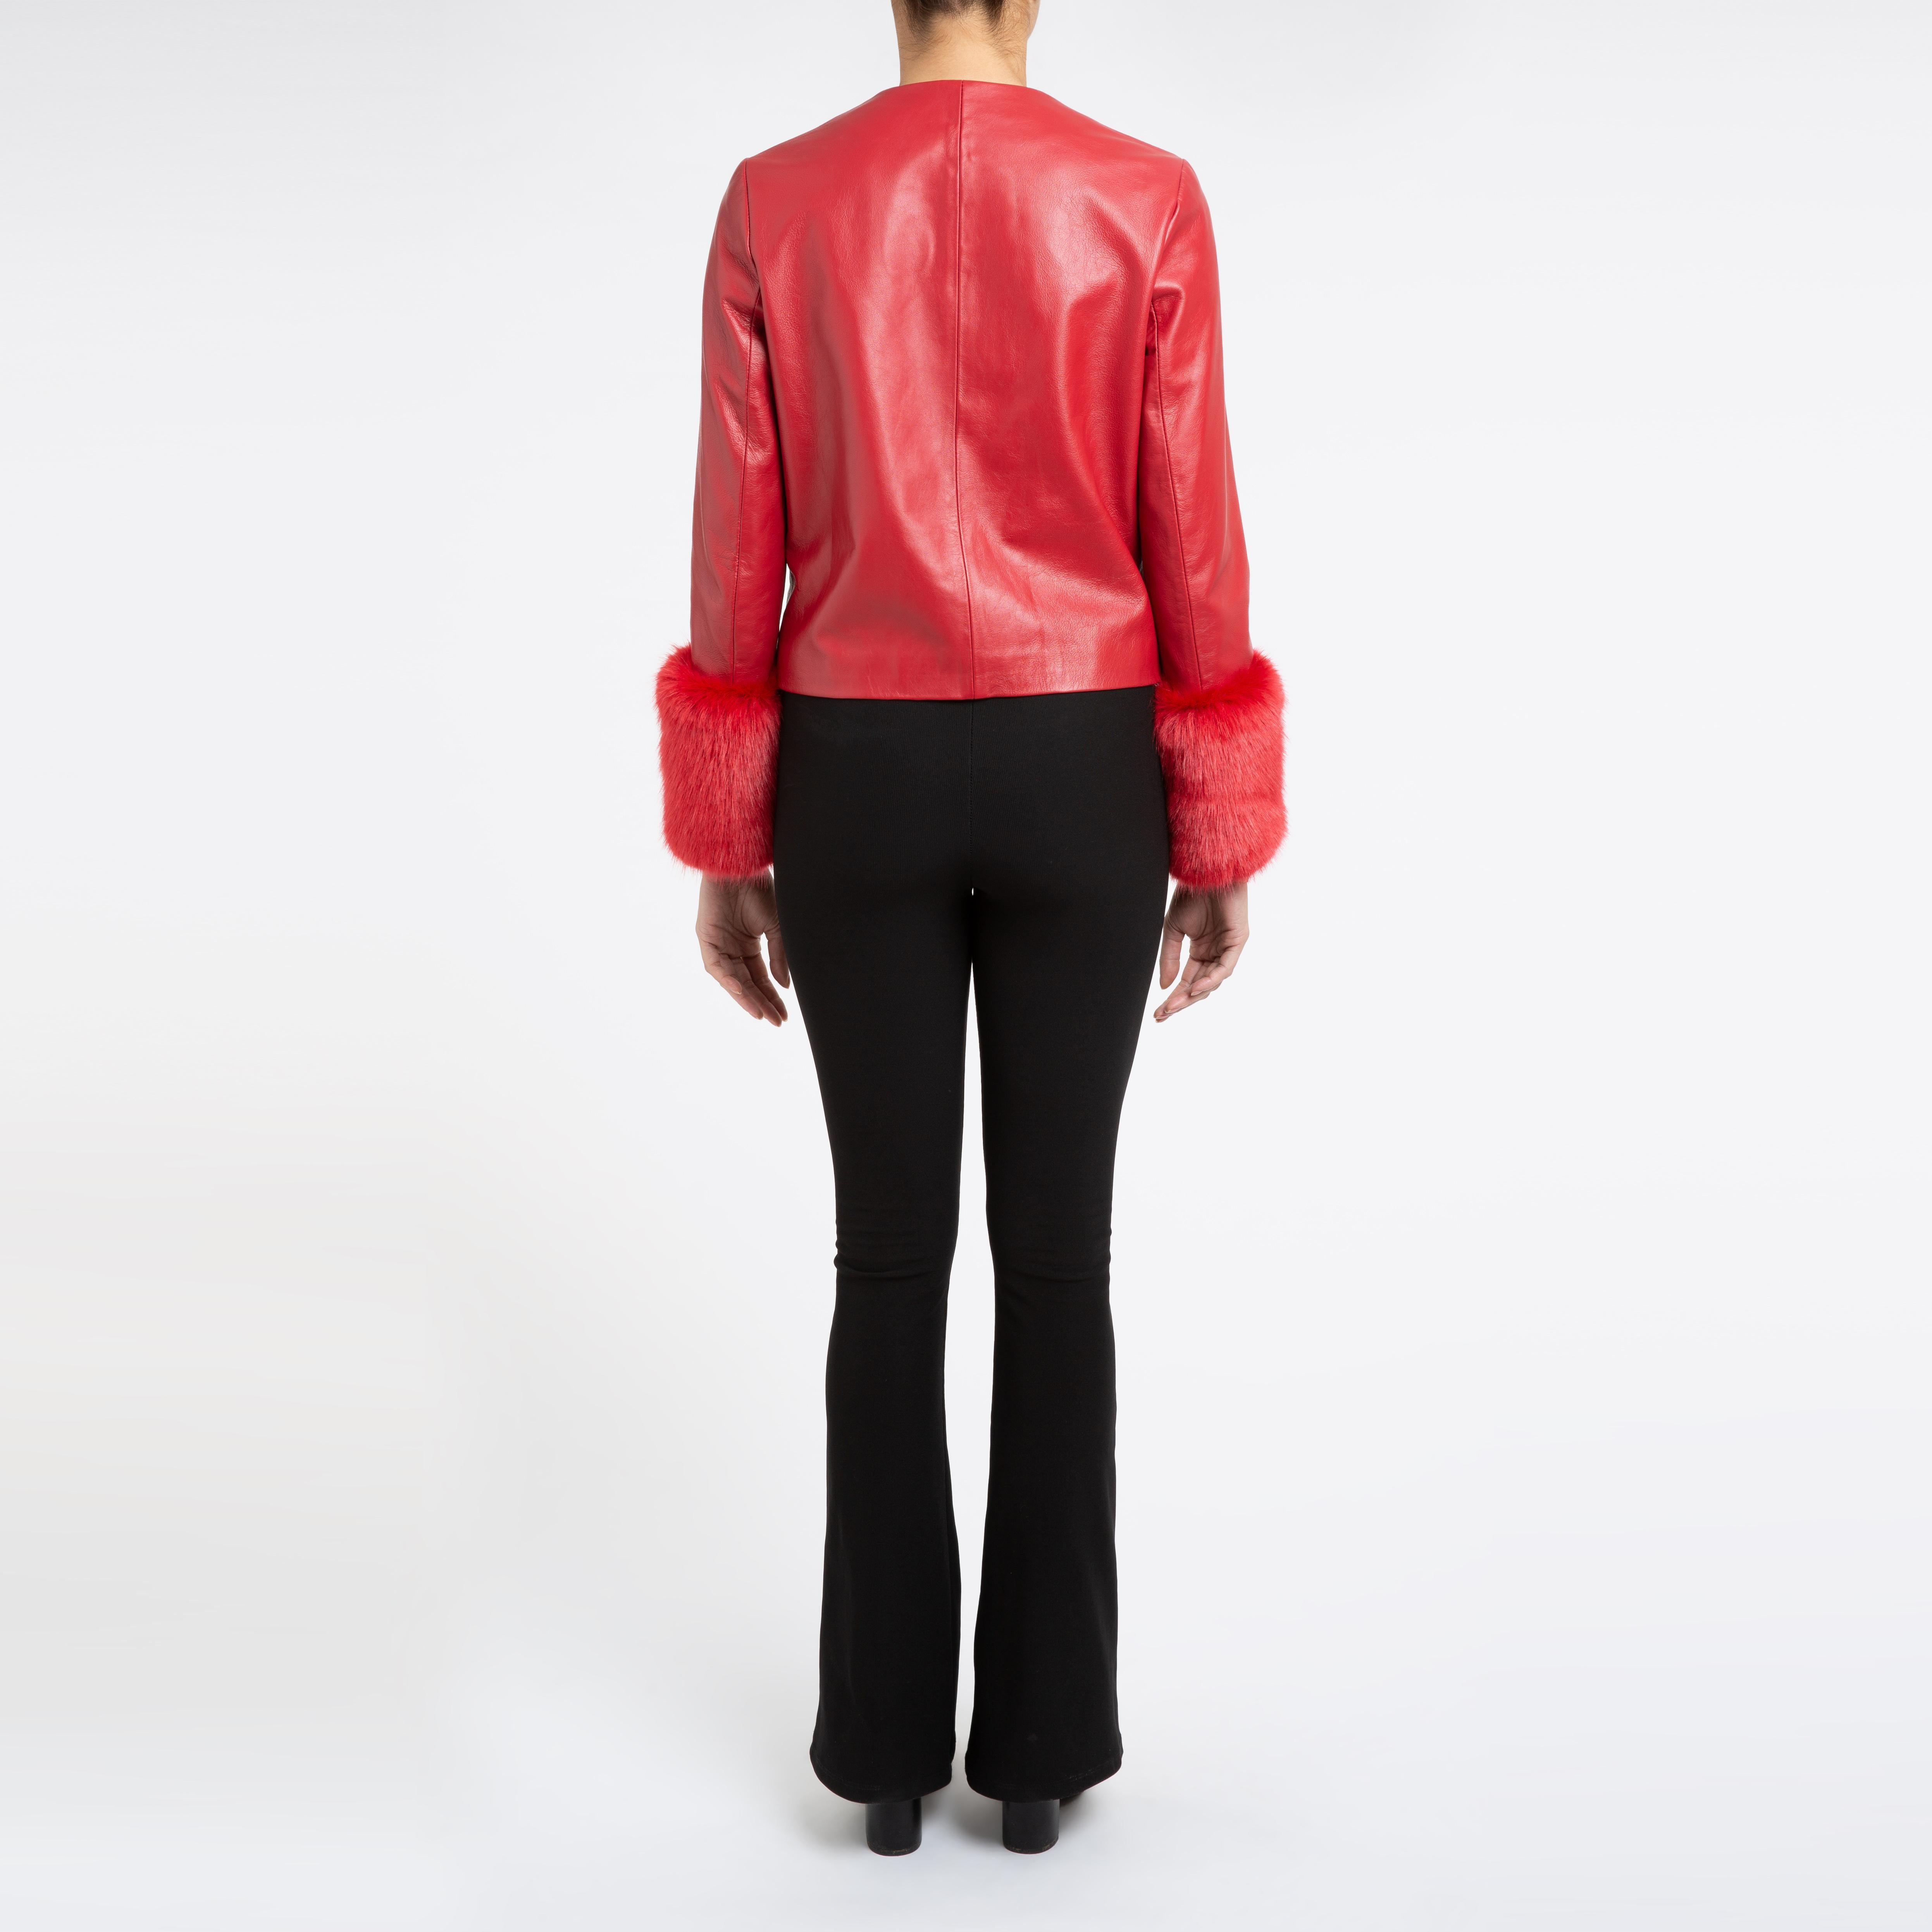 Verheyen Vita Cropped Jacket in Red Leather with Faux Fur - Size uk 8 For Sale 4